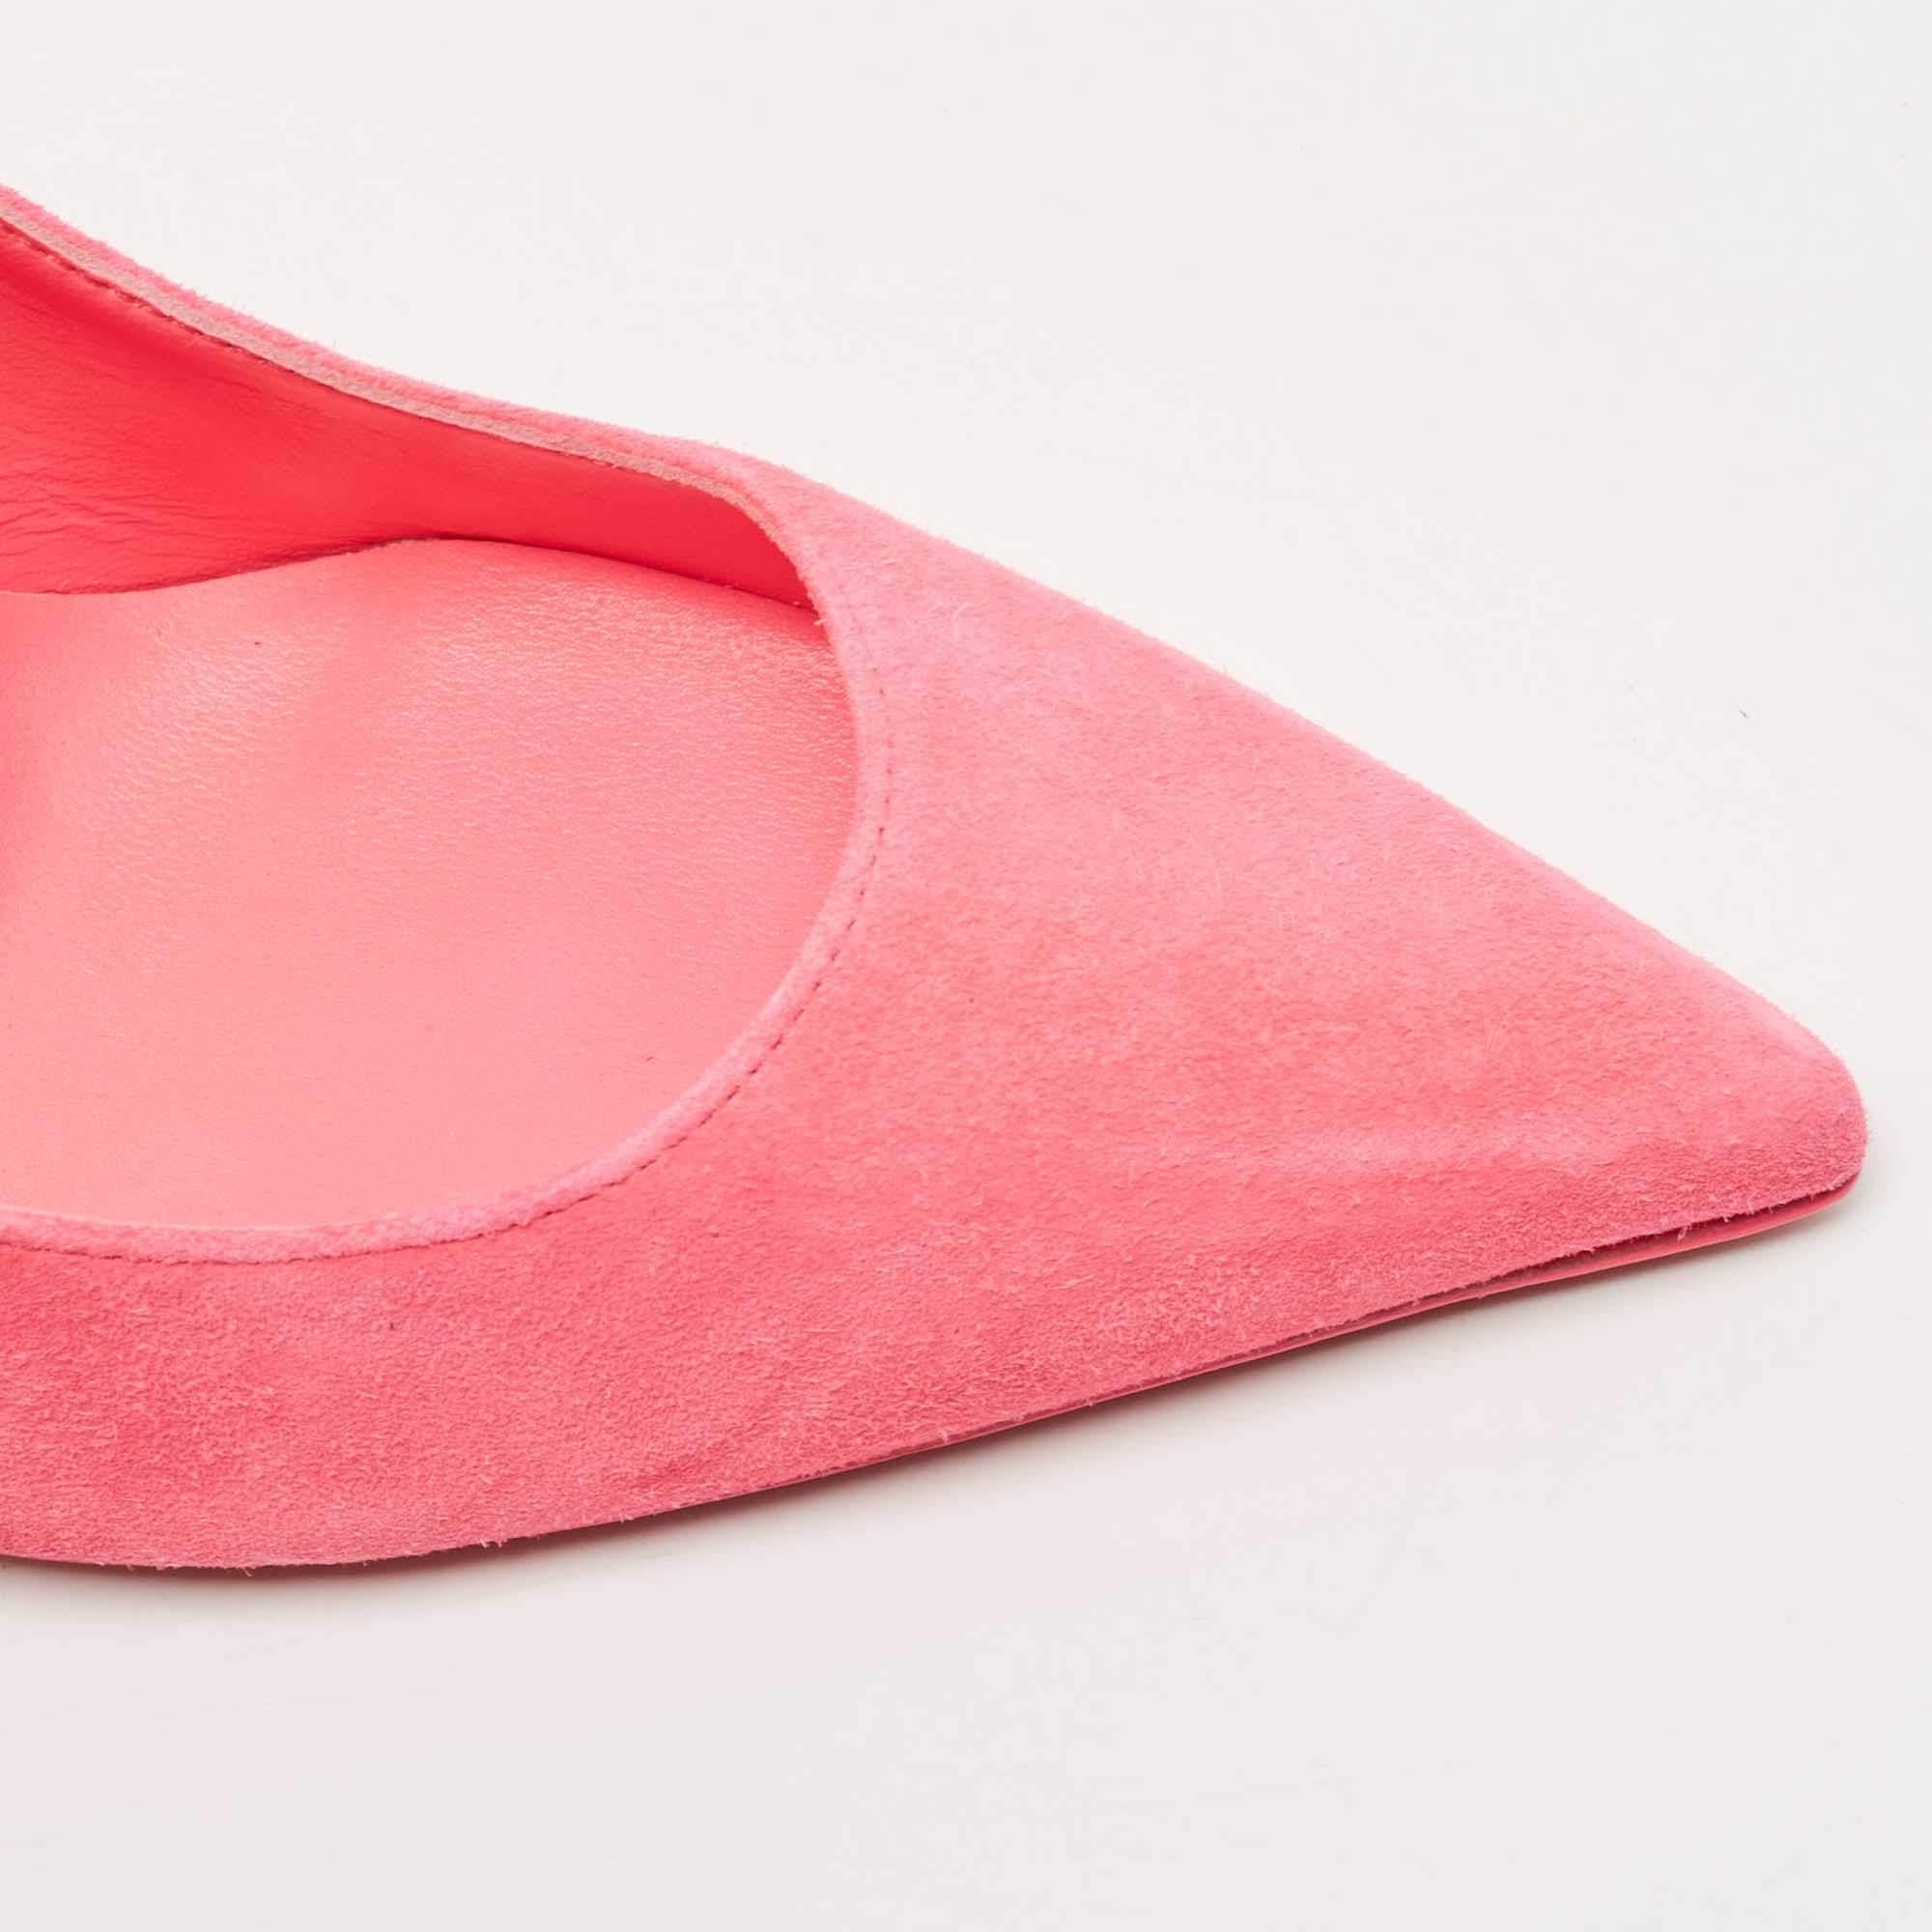 Christian Louboutin Pink Suede Kate Pumps Size 38 2